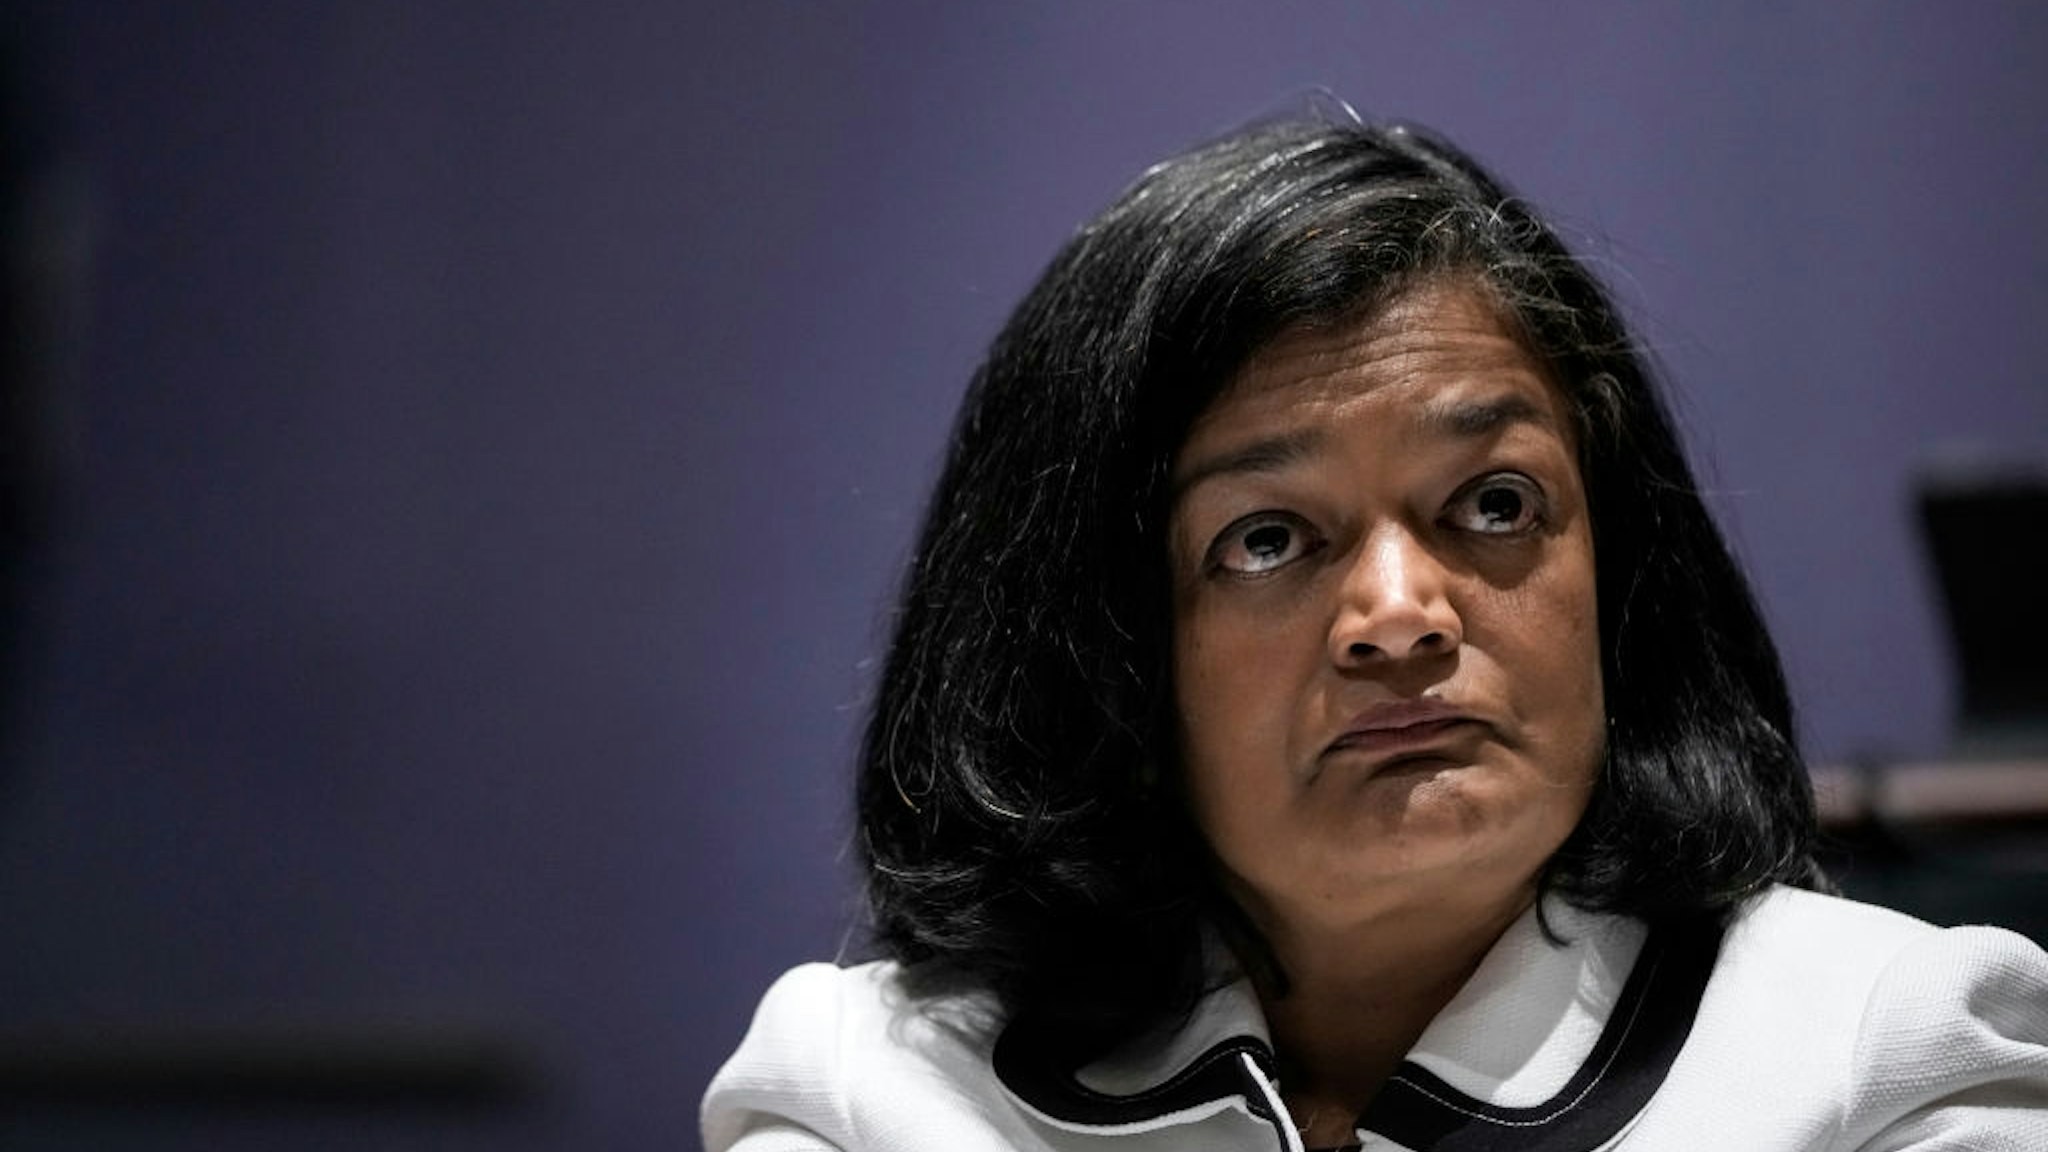 Rep. Pramila Jayapal (D-WA) listens as FBI Director Christopher Wray testifies during a House Judiciary Committee oversight hearing on Capitol Hill June 10, 2021 in Washington, DC.